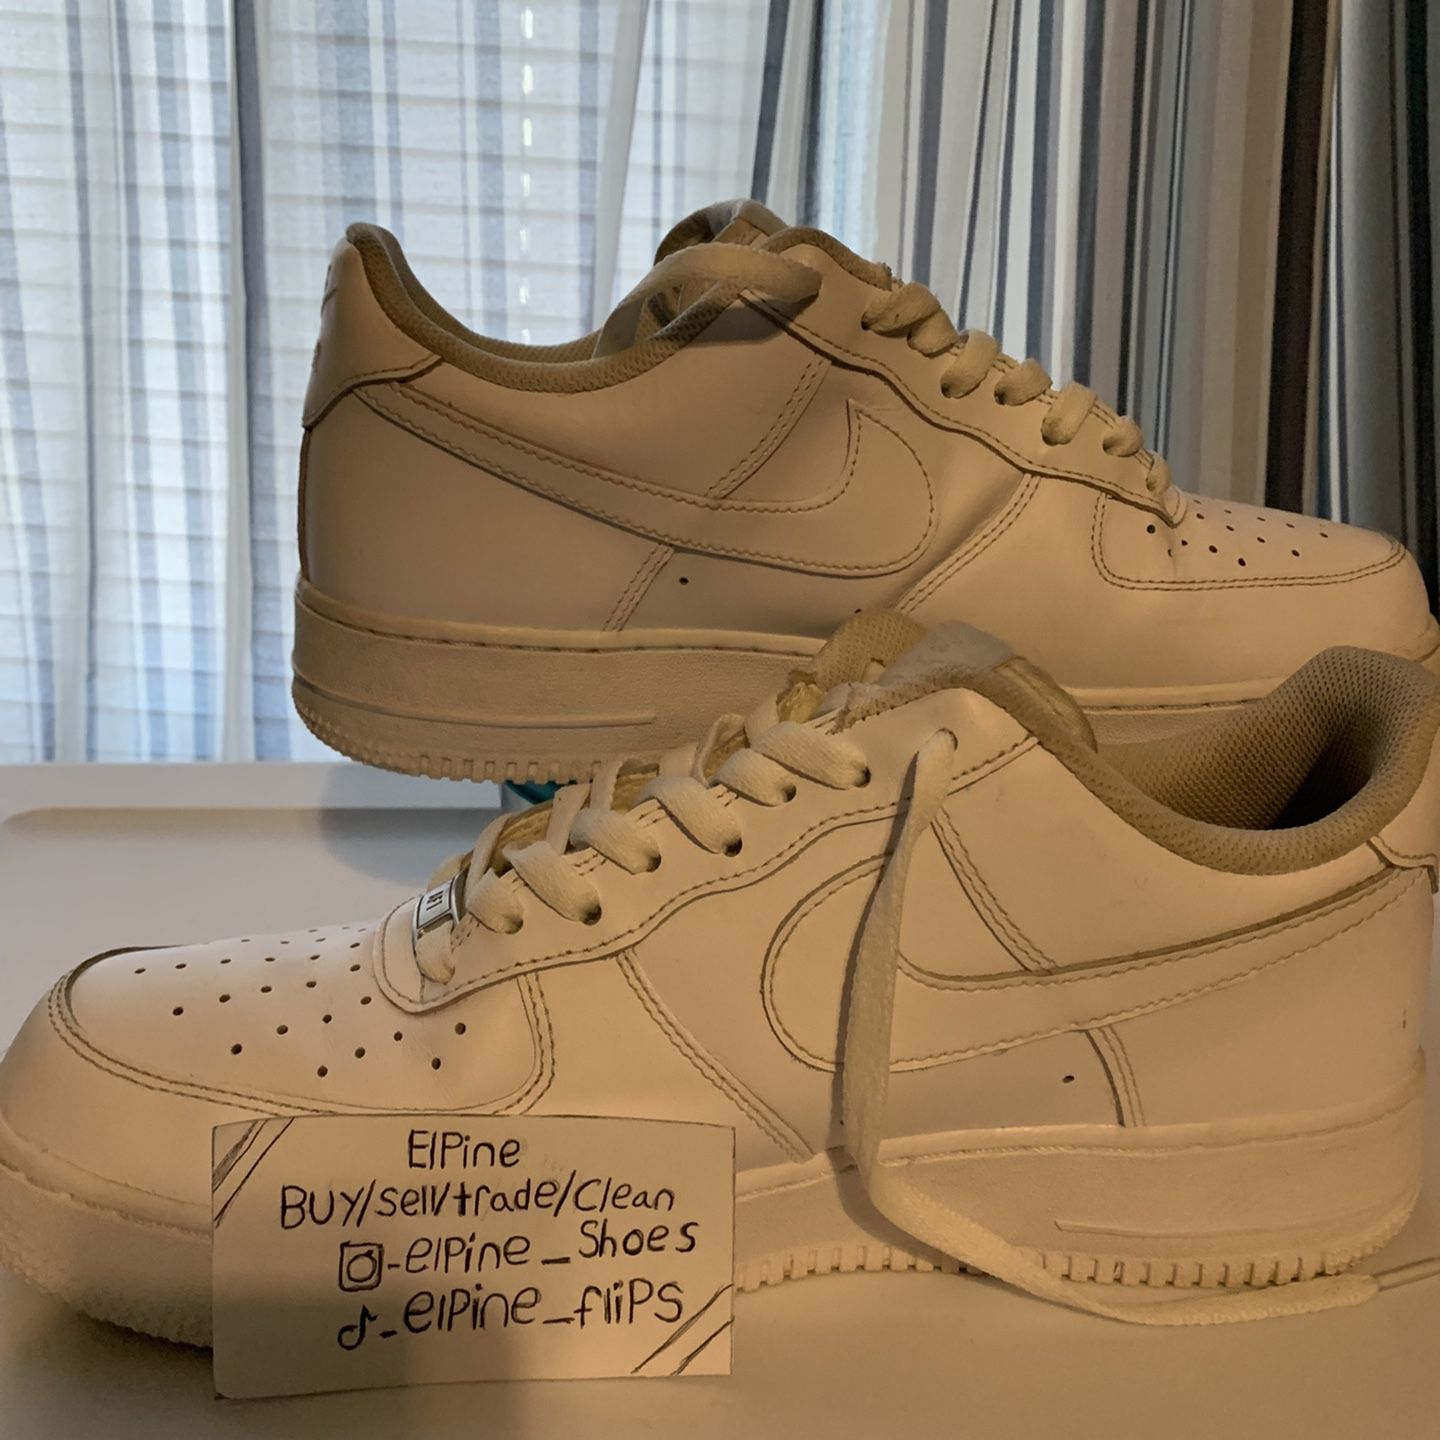 Nike Air Force 1 Low '07 White/ Chlorophyll DH7561-105 Men's Size 10 for  Sale in Westbury, NY - OfferUp